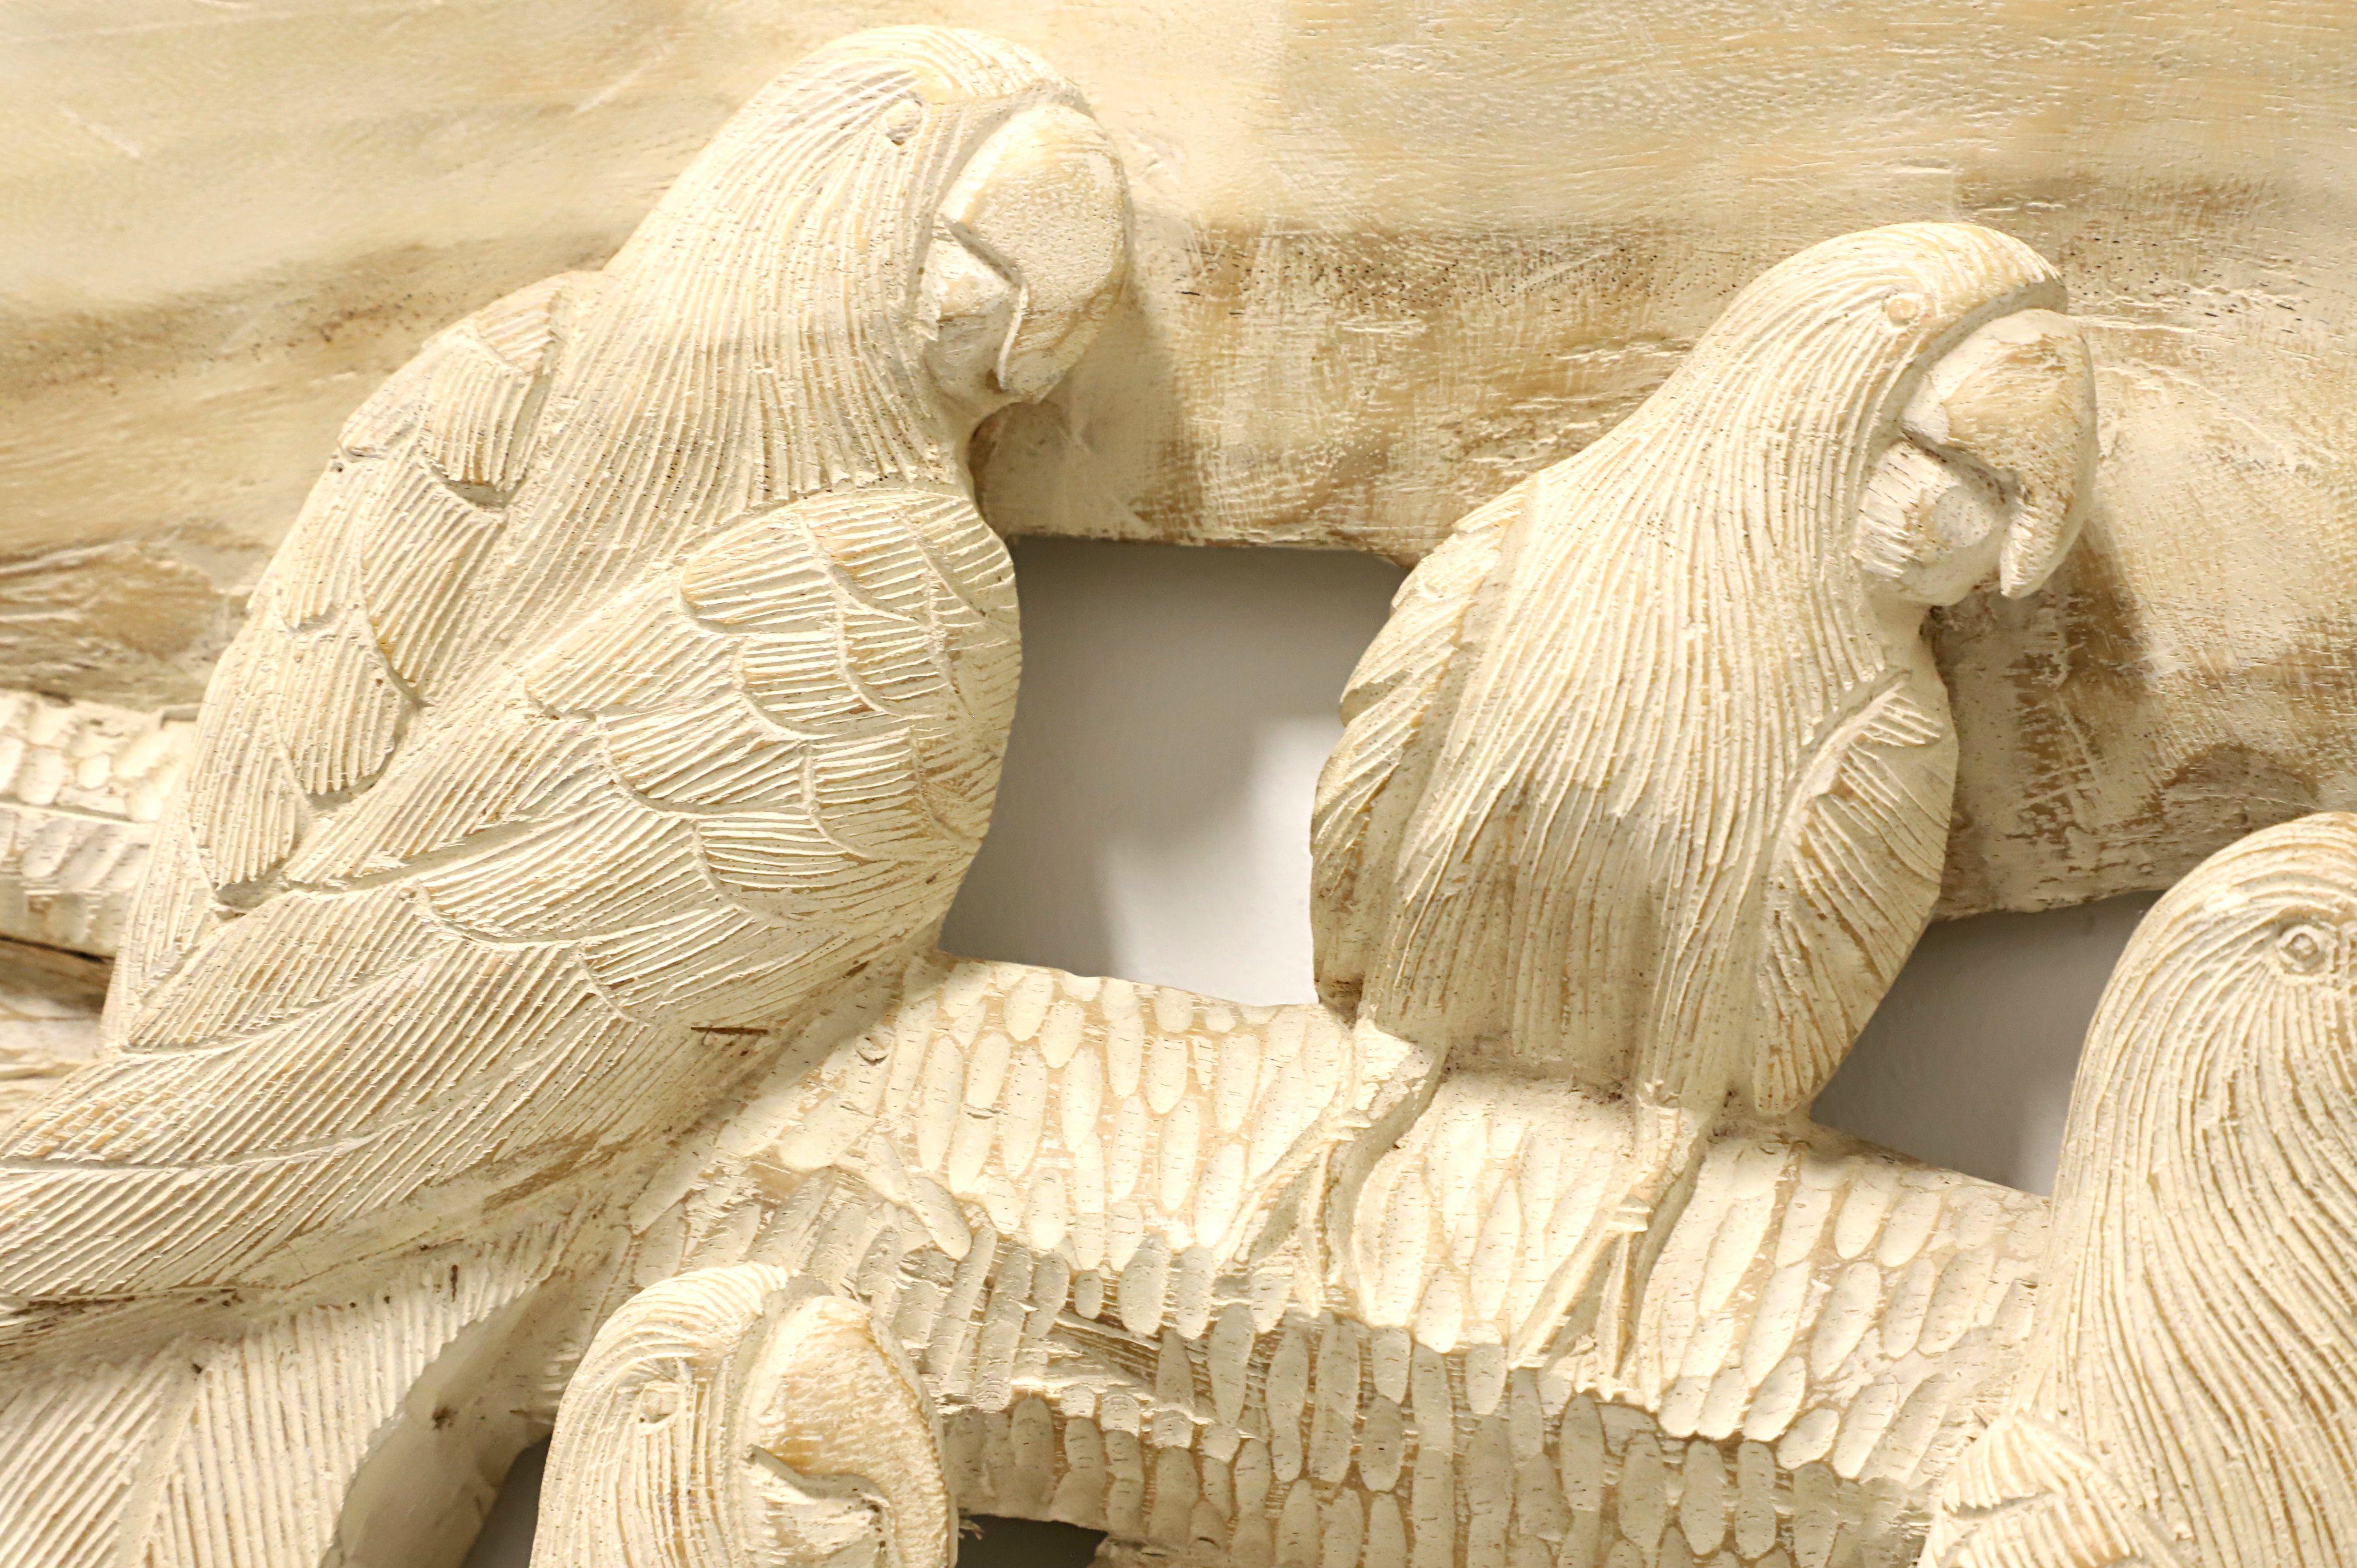 Mid 20th Century Avian Wood Carving - Parrots in a Tree In Good Condition For Sale In Charlotte, NC